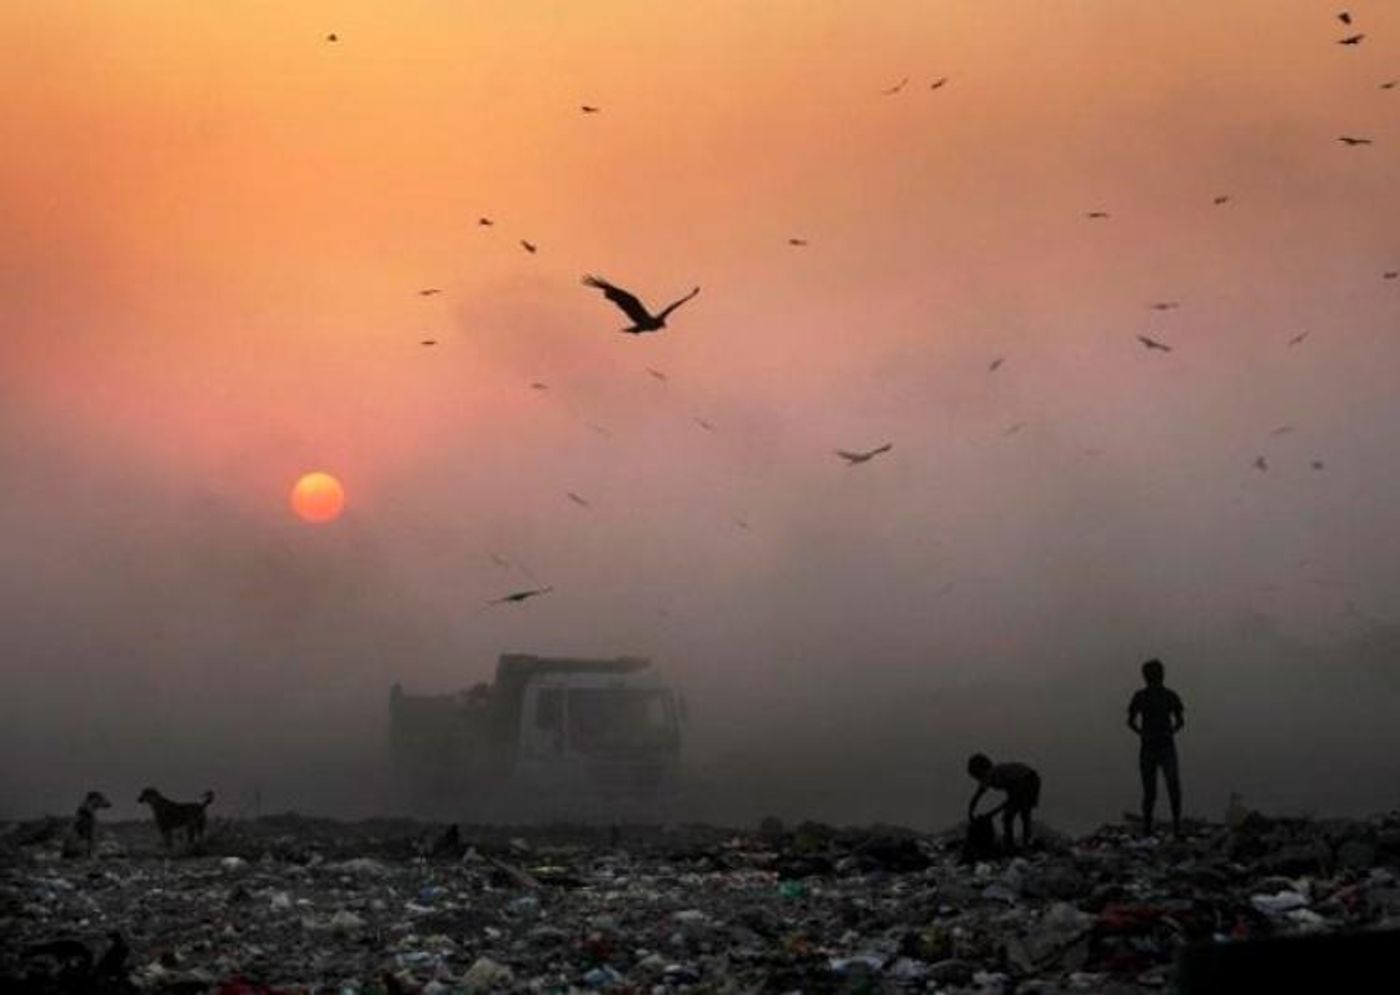 We know how horrible air pollution is for humans. But do we know what it does to birds? Photo: India TV